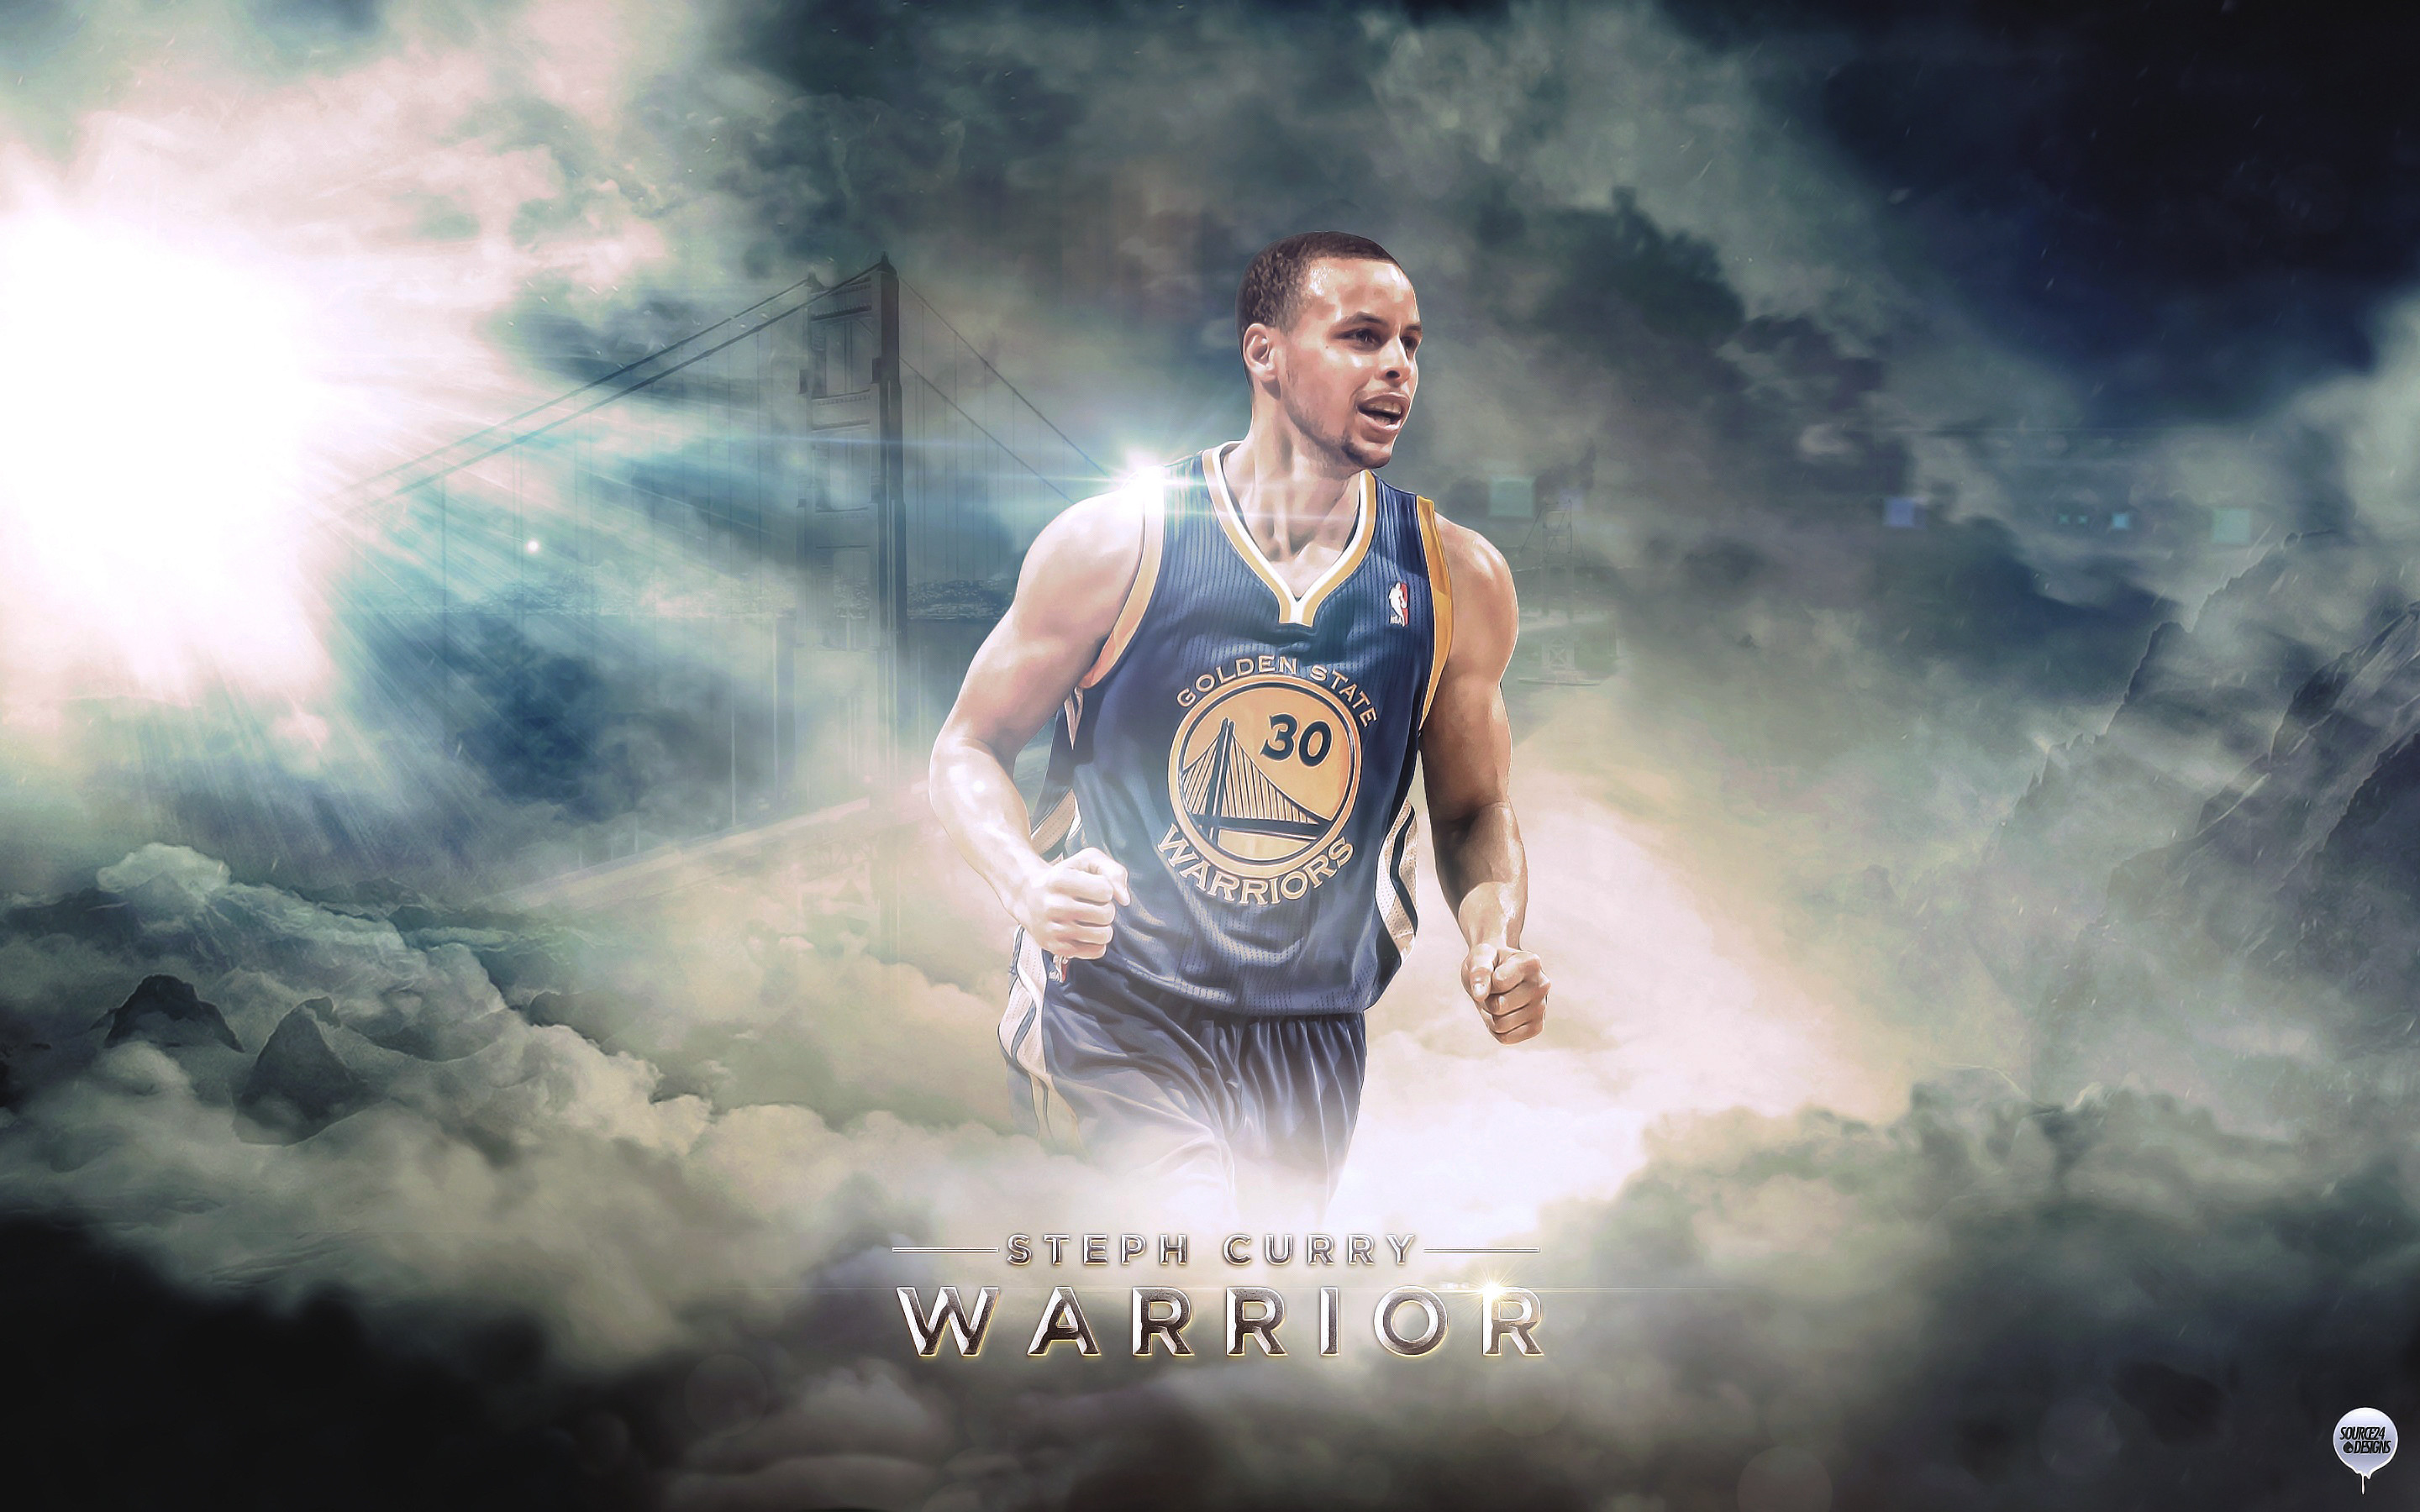 Stephen Curry Wallpaper Free Download | Wallpapers, Backgrounds .